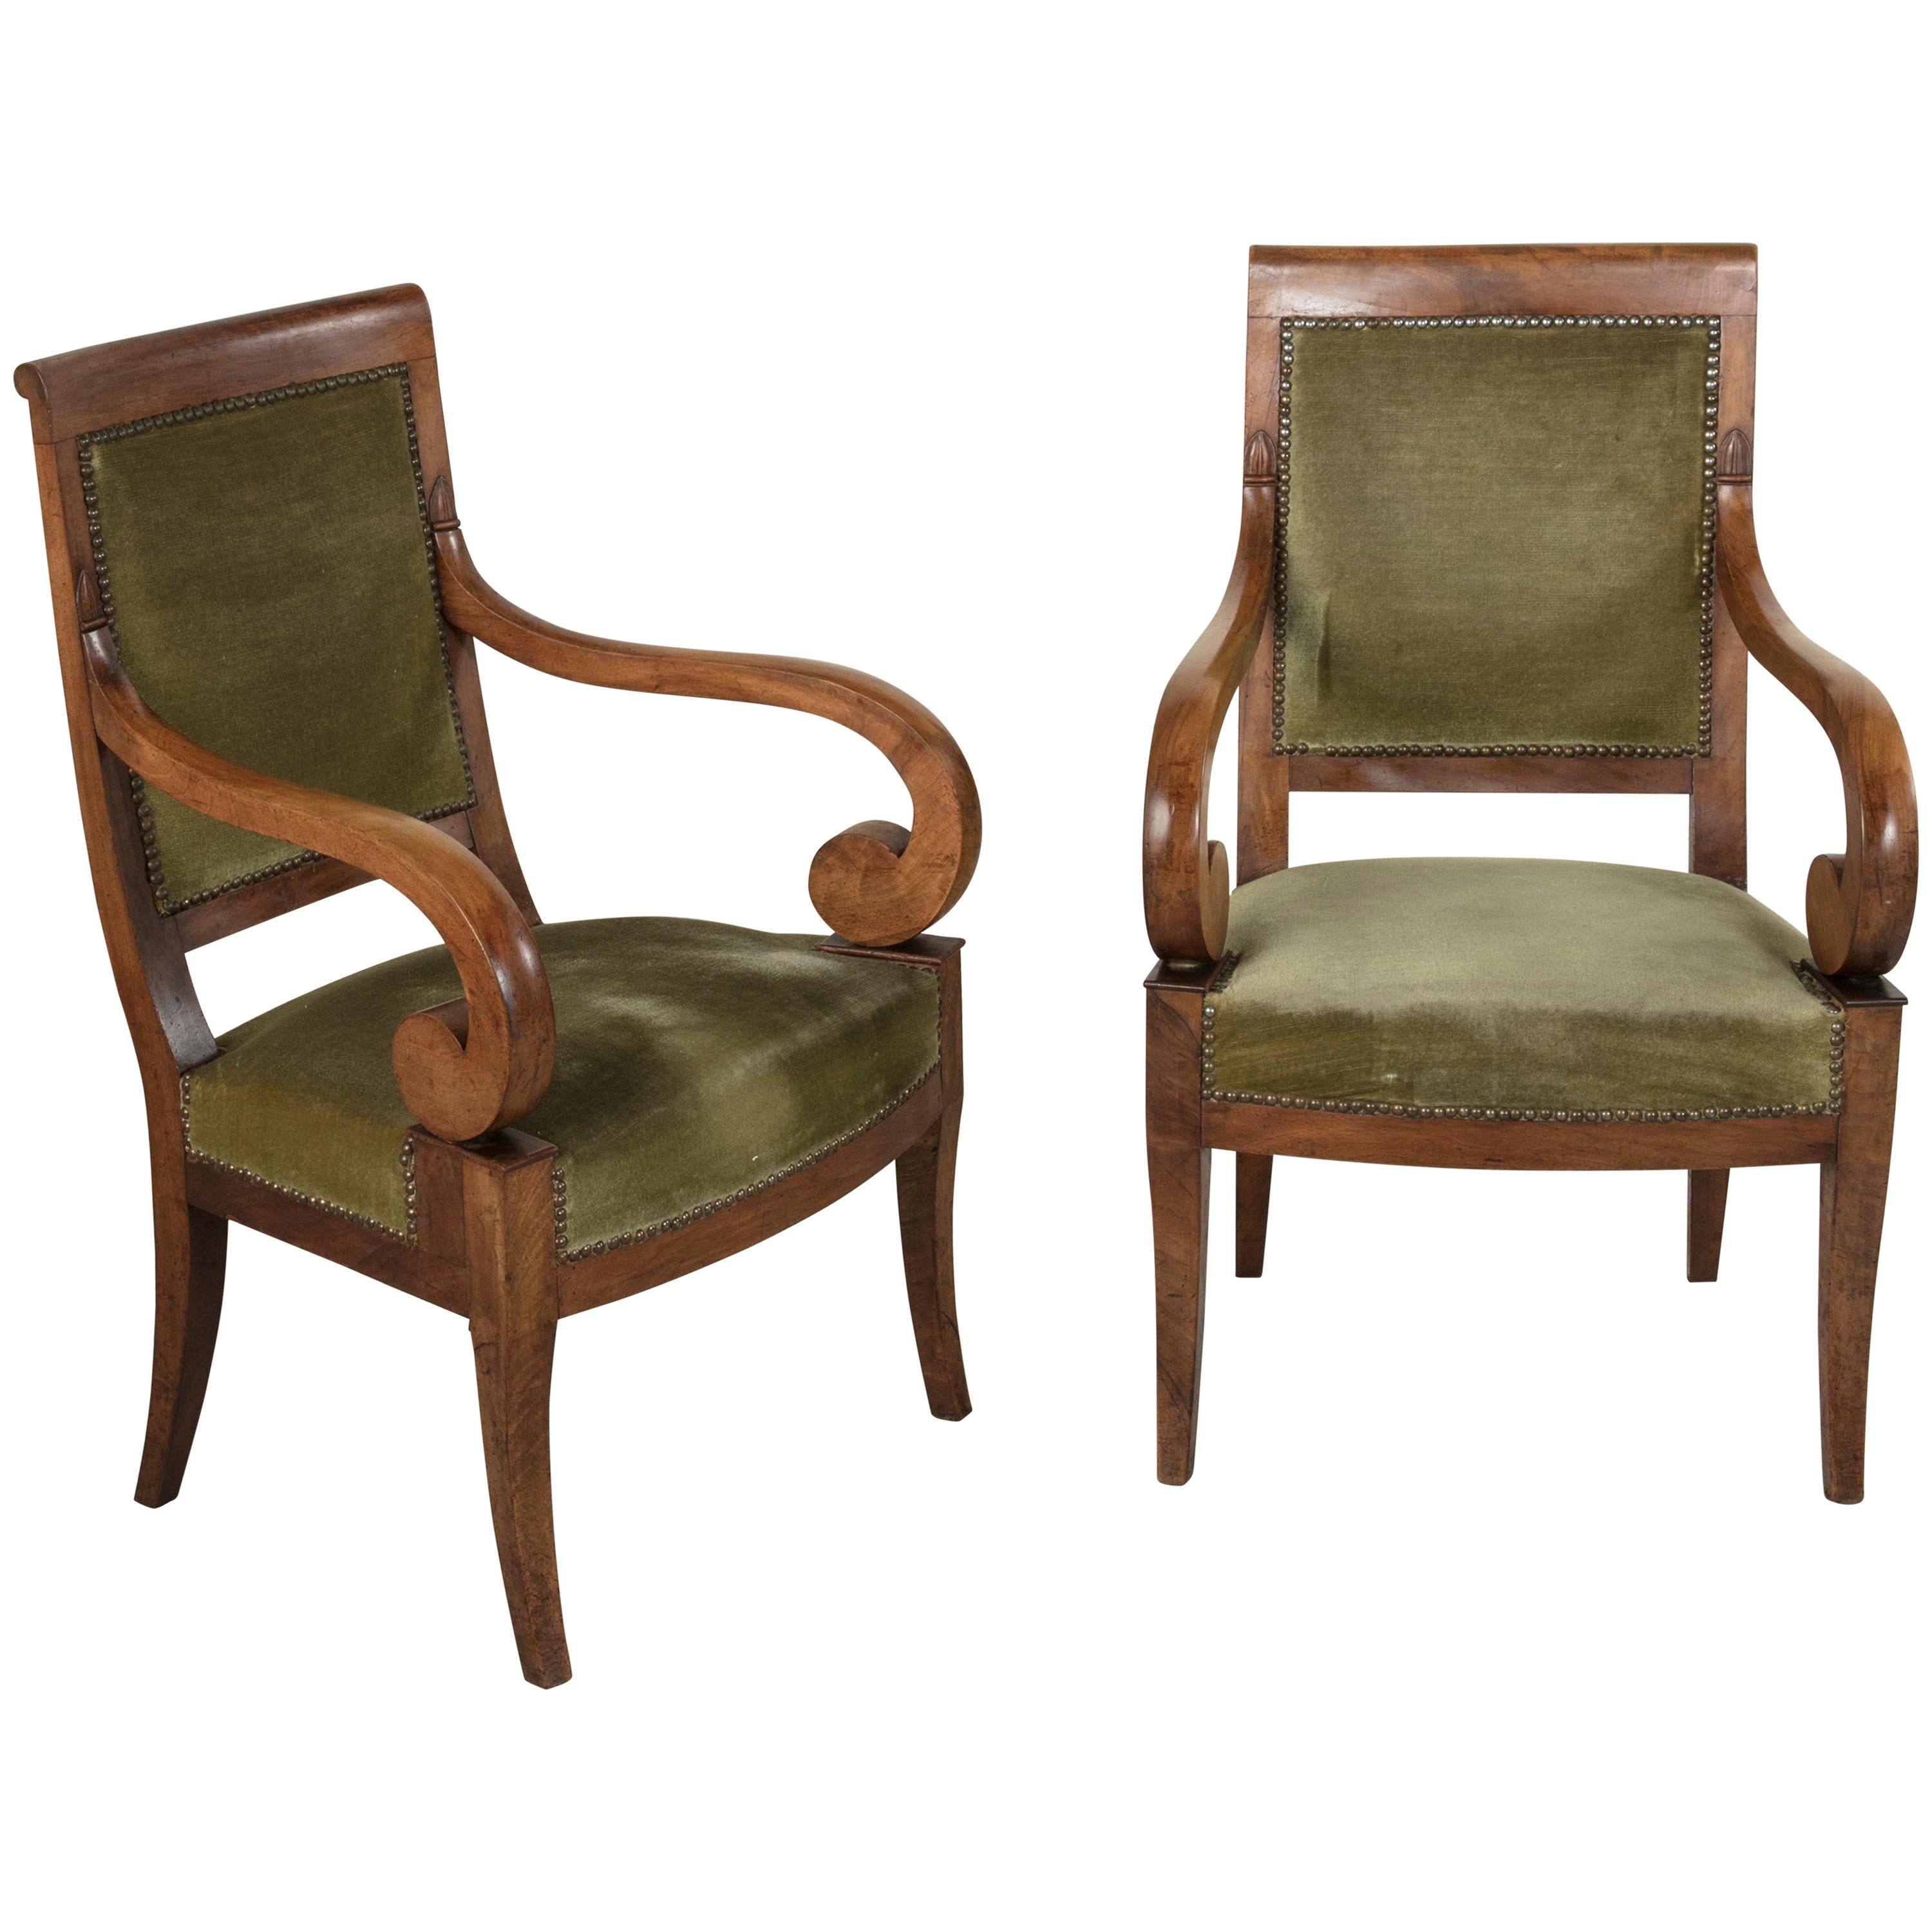 Early 19th Century French Restauration Period Walnut Armchairs, Bergeres, Mohair